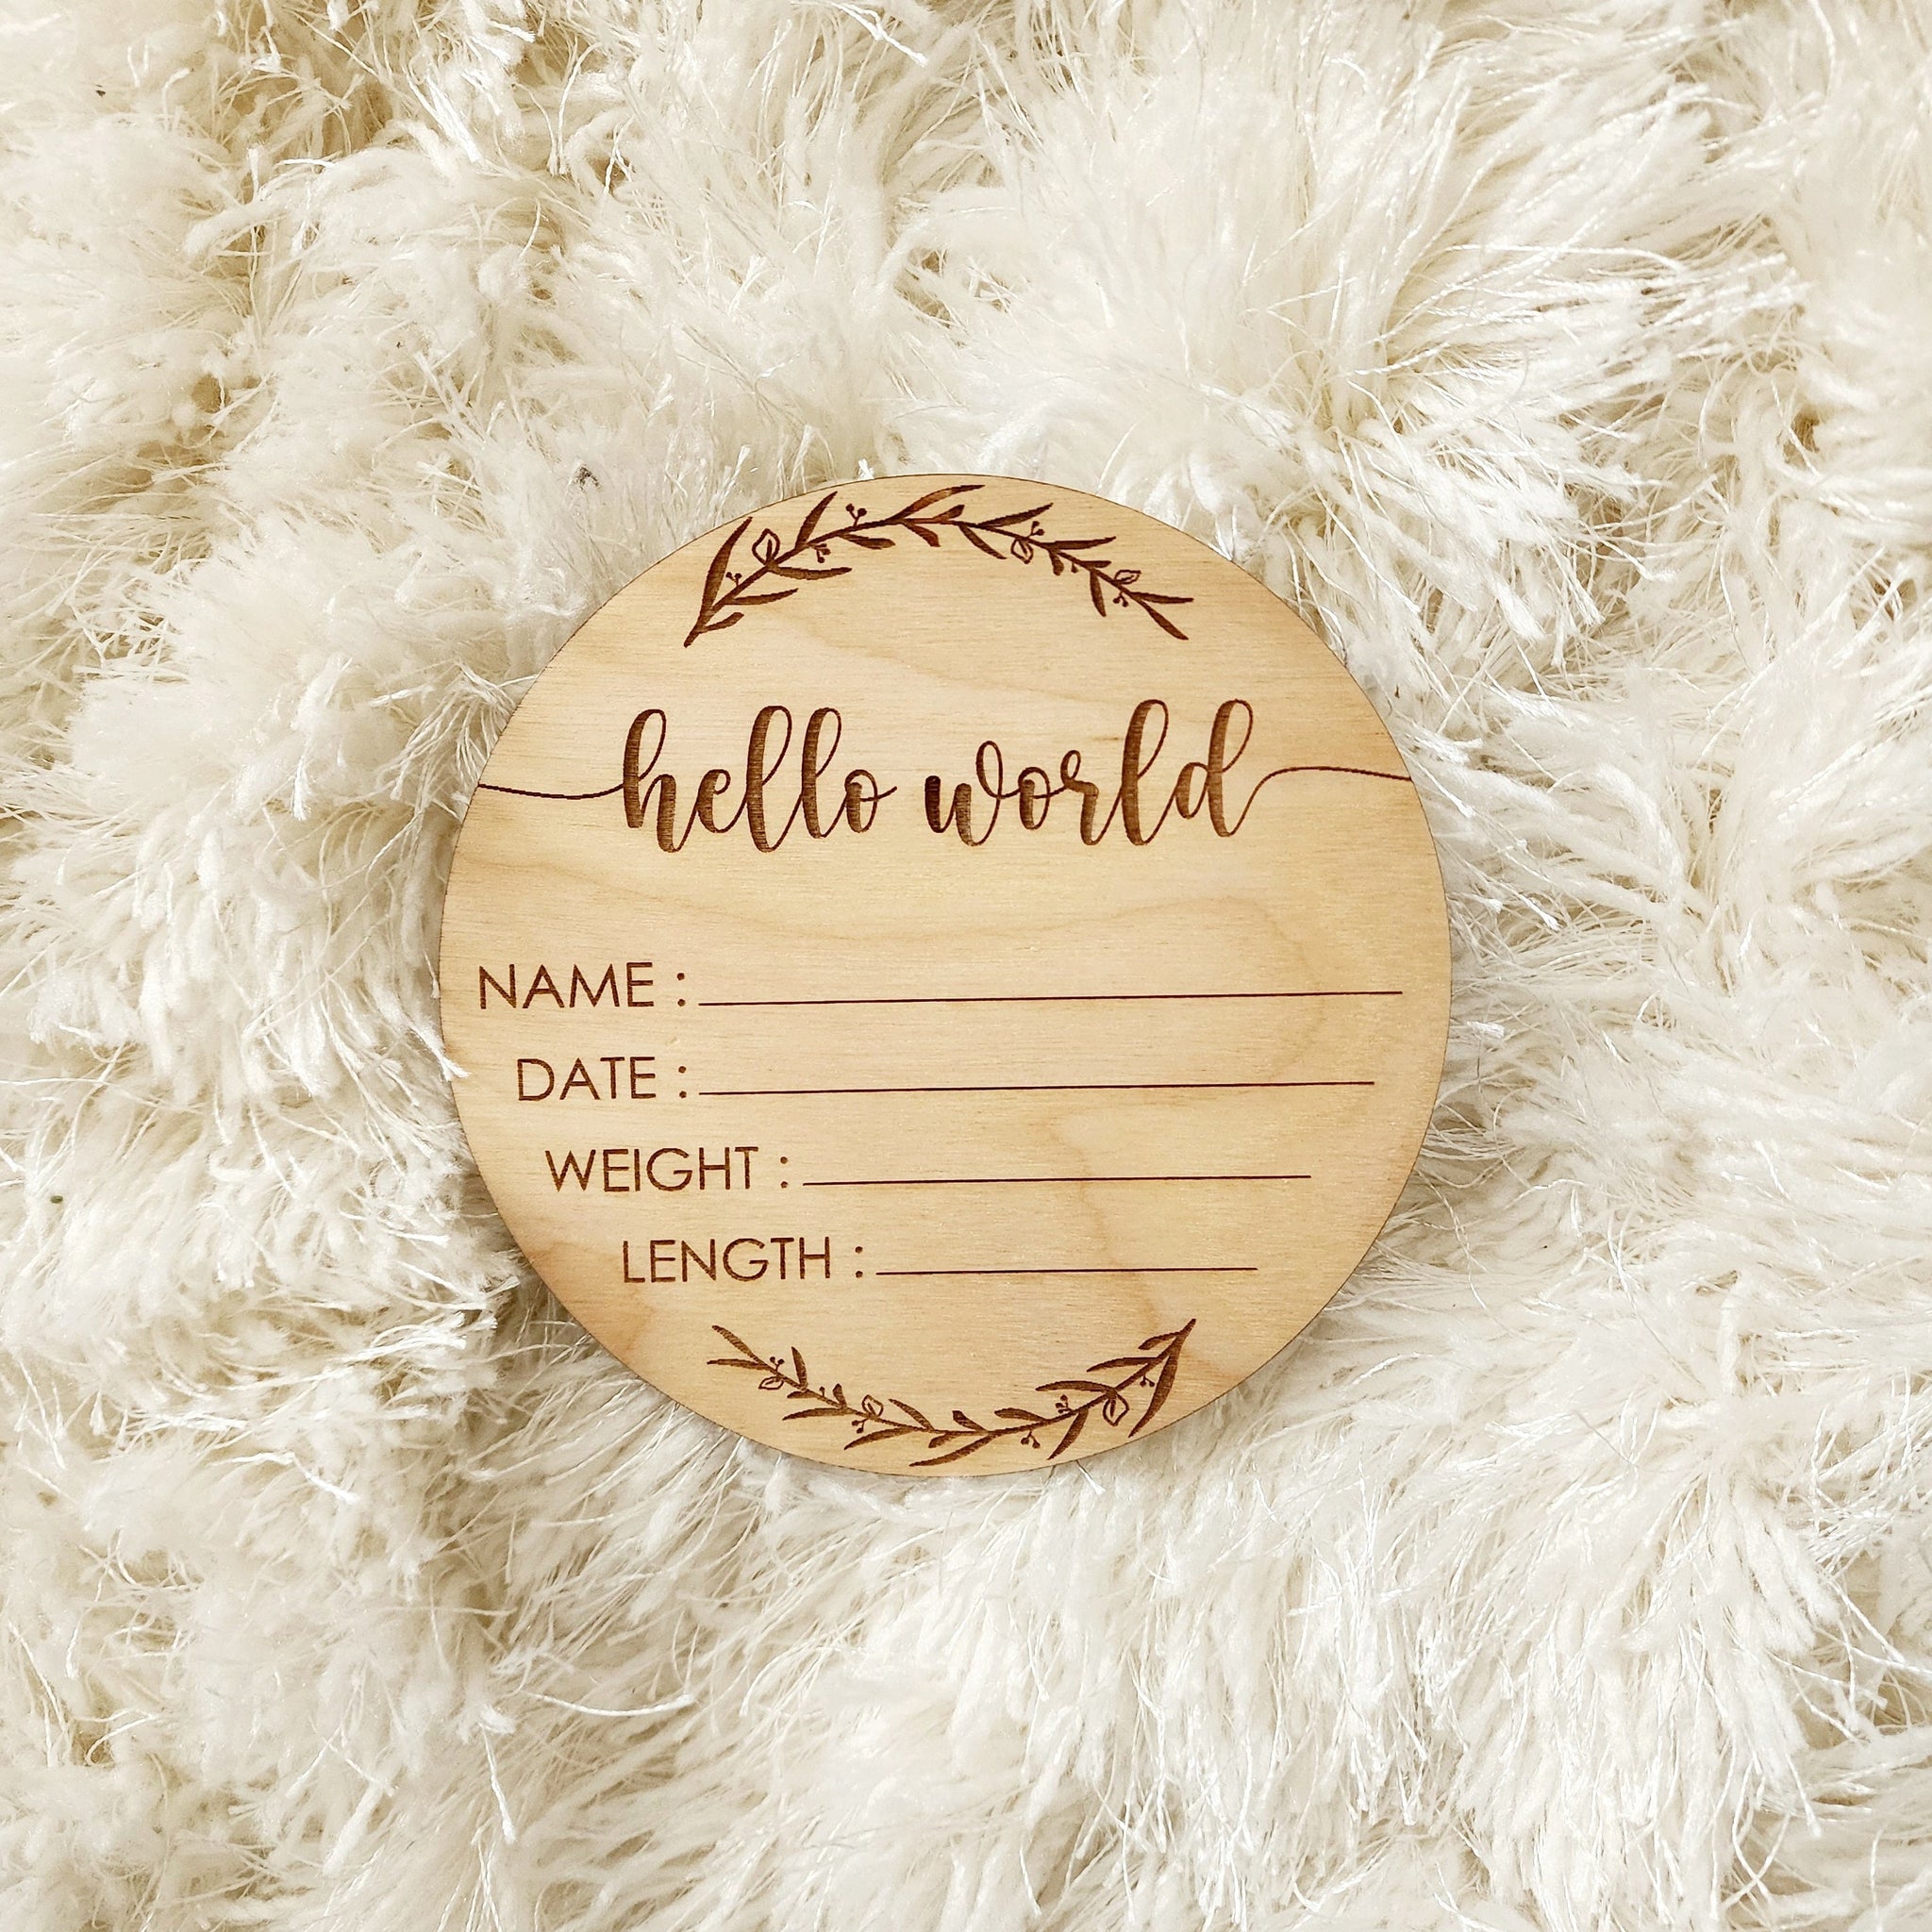 Hello World - Baby Name and Stats Sign